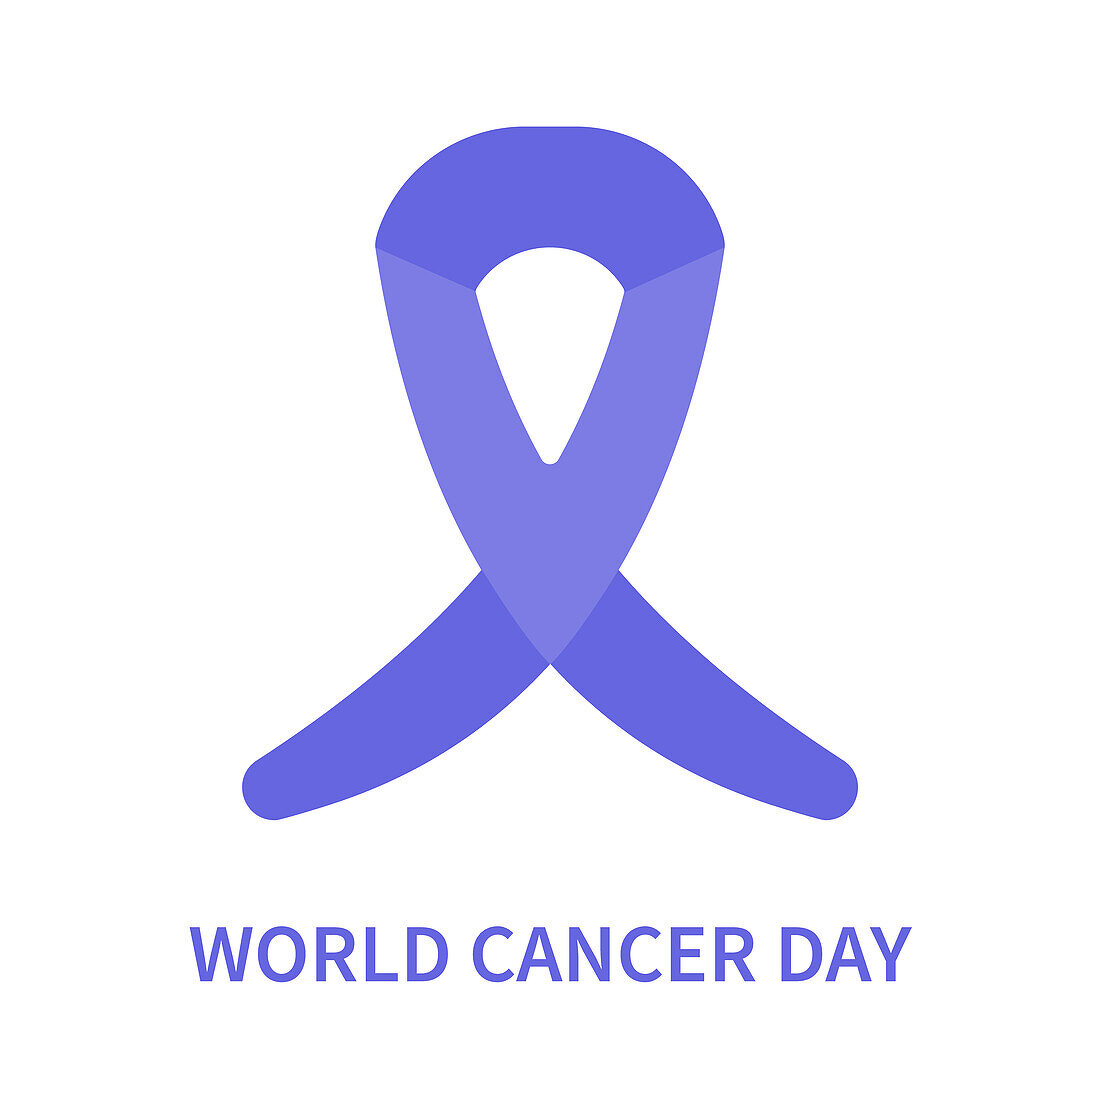 World cancer day, conceptual illustration